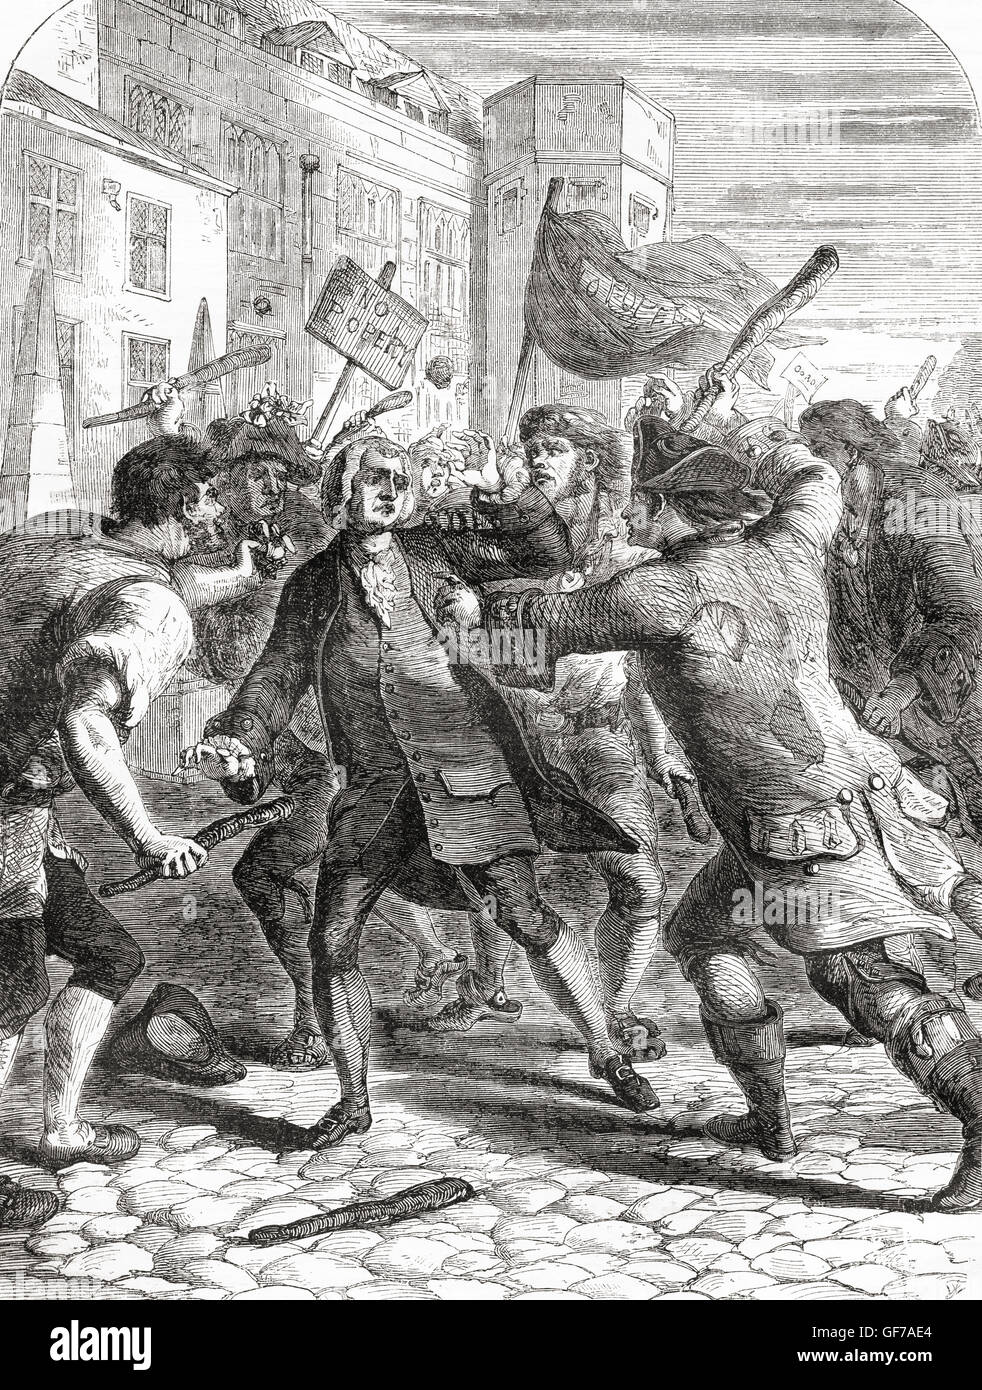 The 'No-Popery' rioters attacking members of Parliament in Palace Yard, Westminster, London England during The Gordon Riots of 1780, an anti-Catholic protest in London against the Papists Act of 1778. Stock Photo